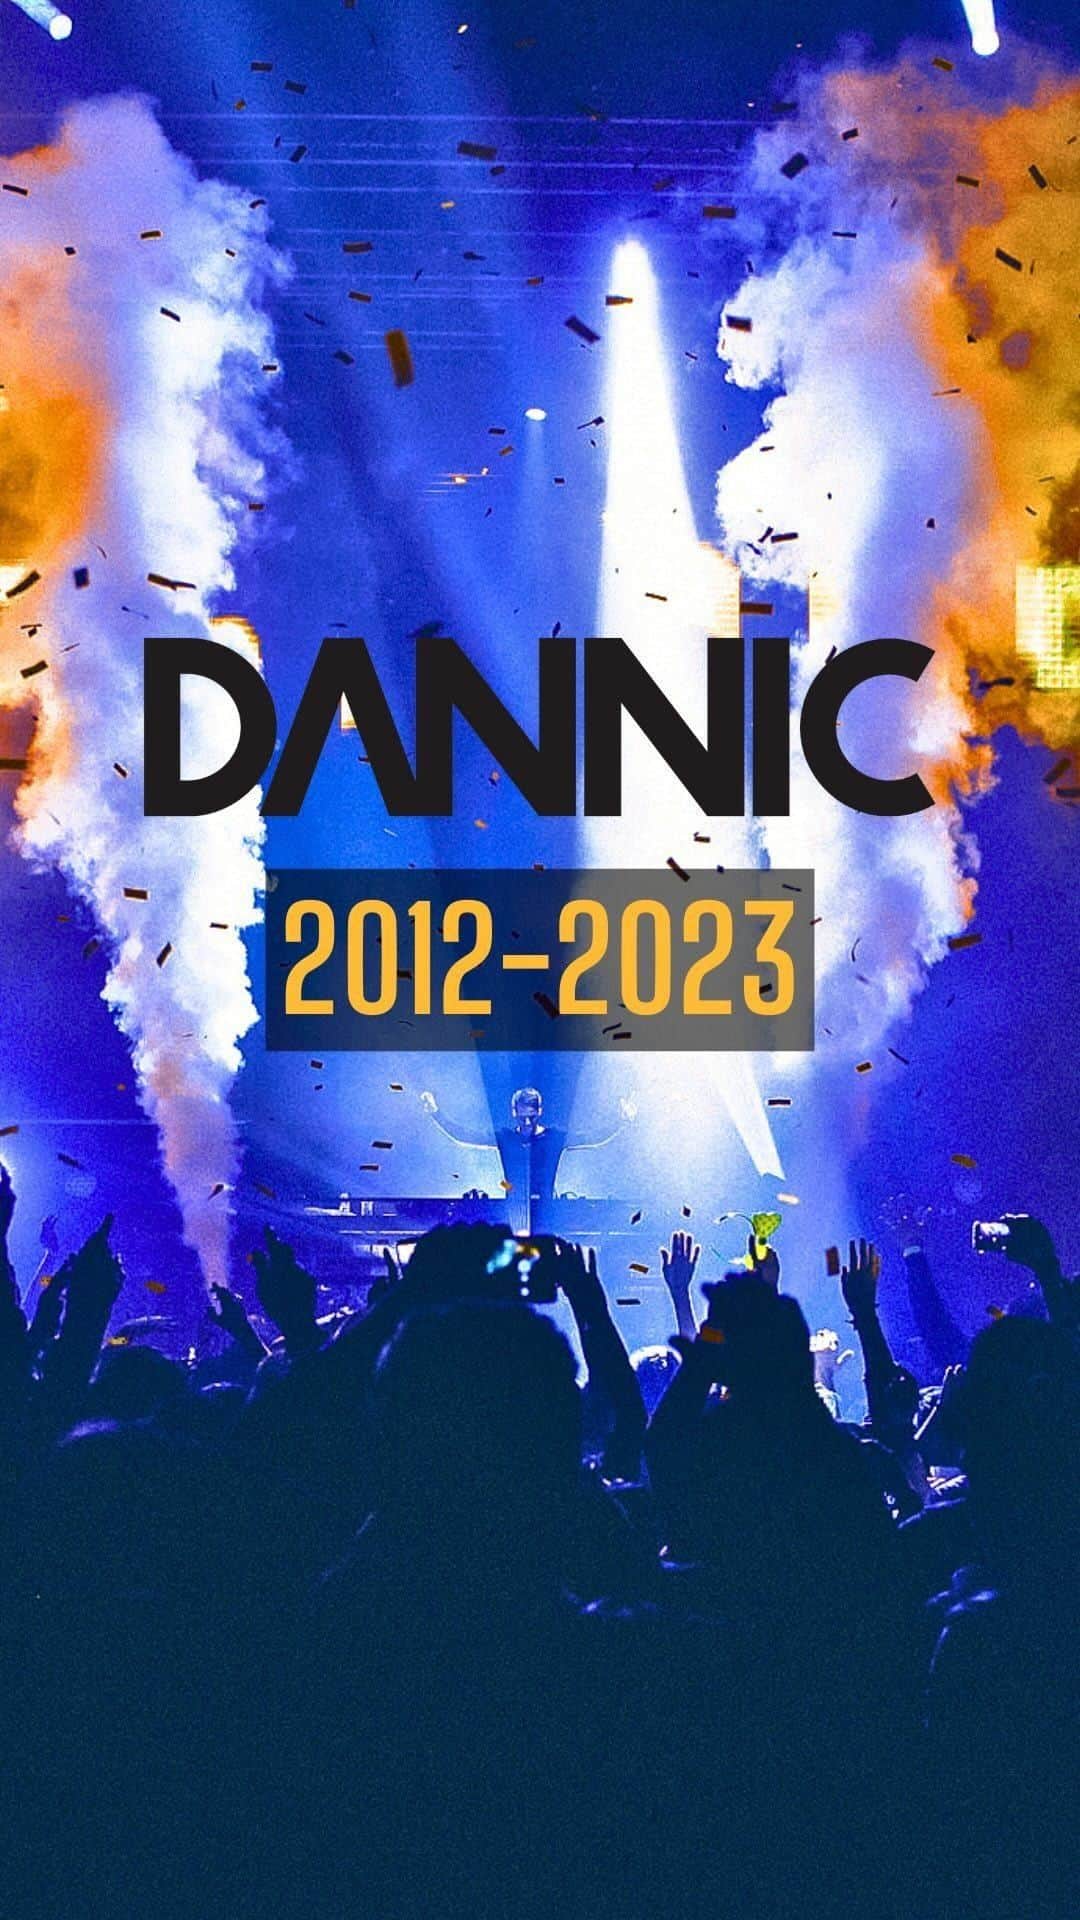 Dannicのインスタグラム：「More than a decade of Dannic music💥🎹🎧. It was hard to choose only one song each year, but curious to know which one is your fav from this selection 2012-2023!? 👇🏻👀 #Dannic #decade #edm #progressive #djlife」